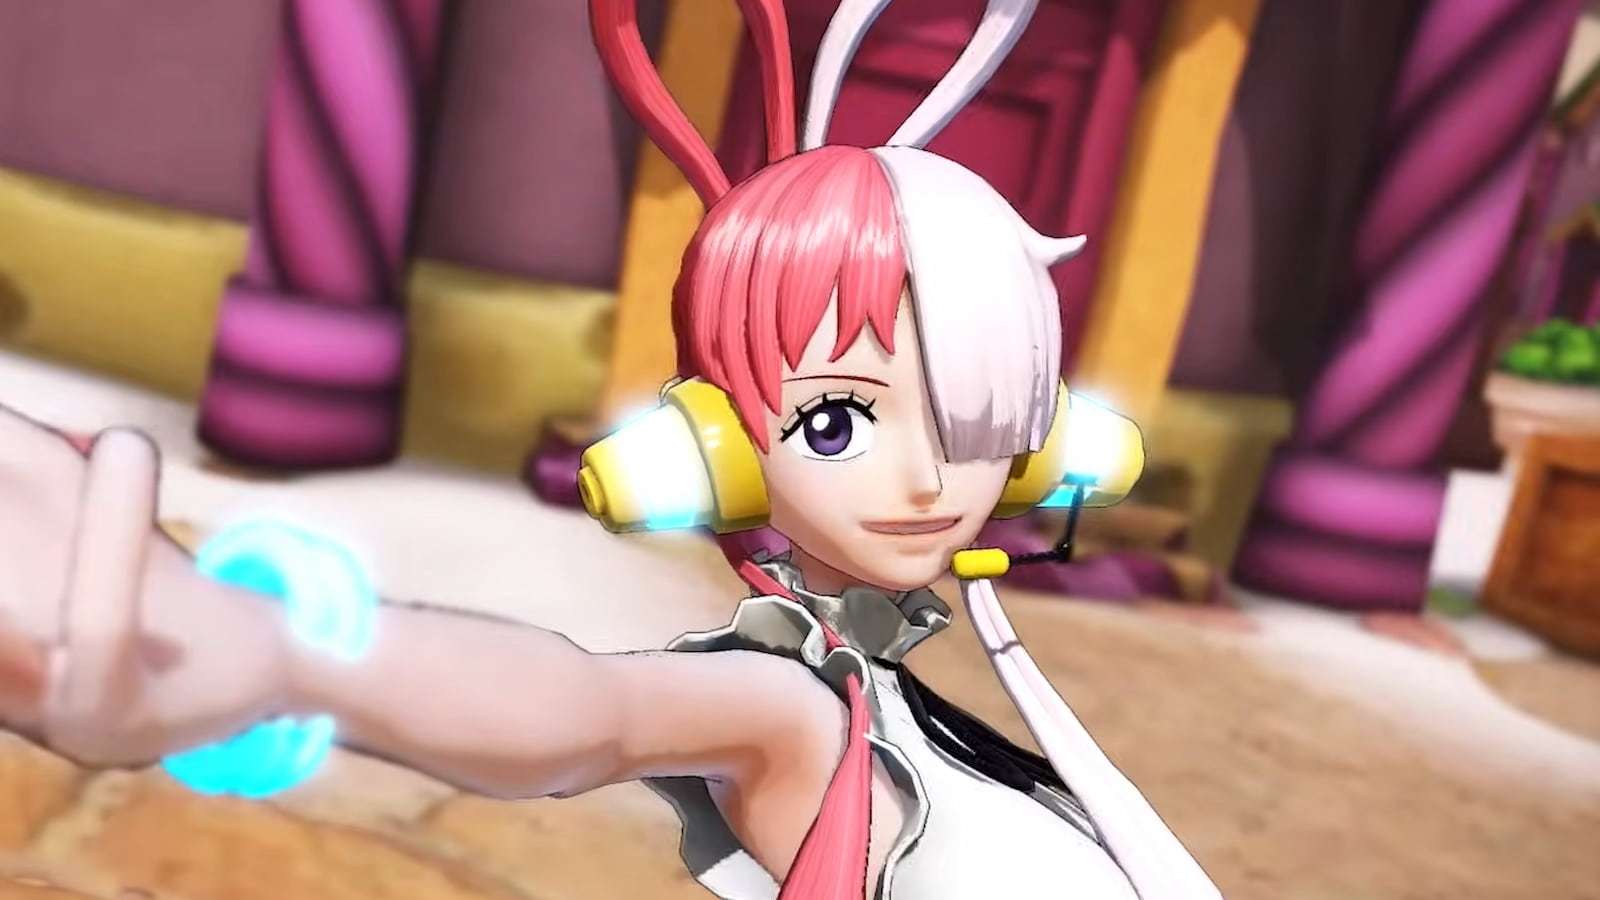 One Piece Pirate Warriors 4 DLC character Uta from Film Red